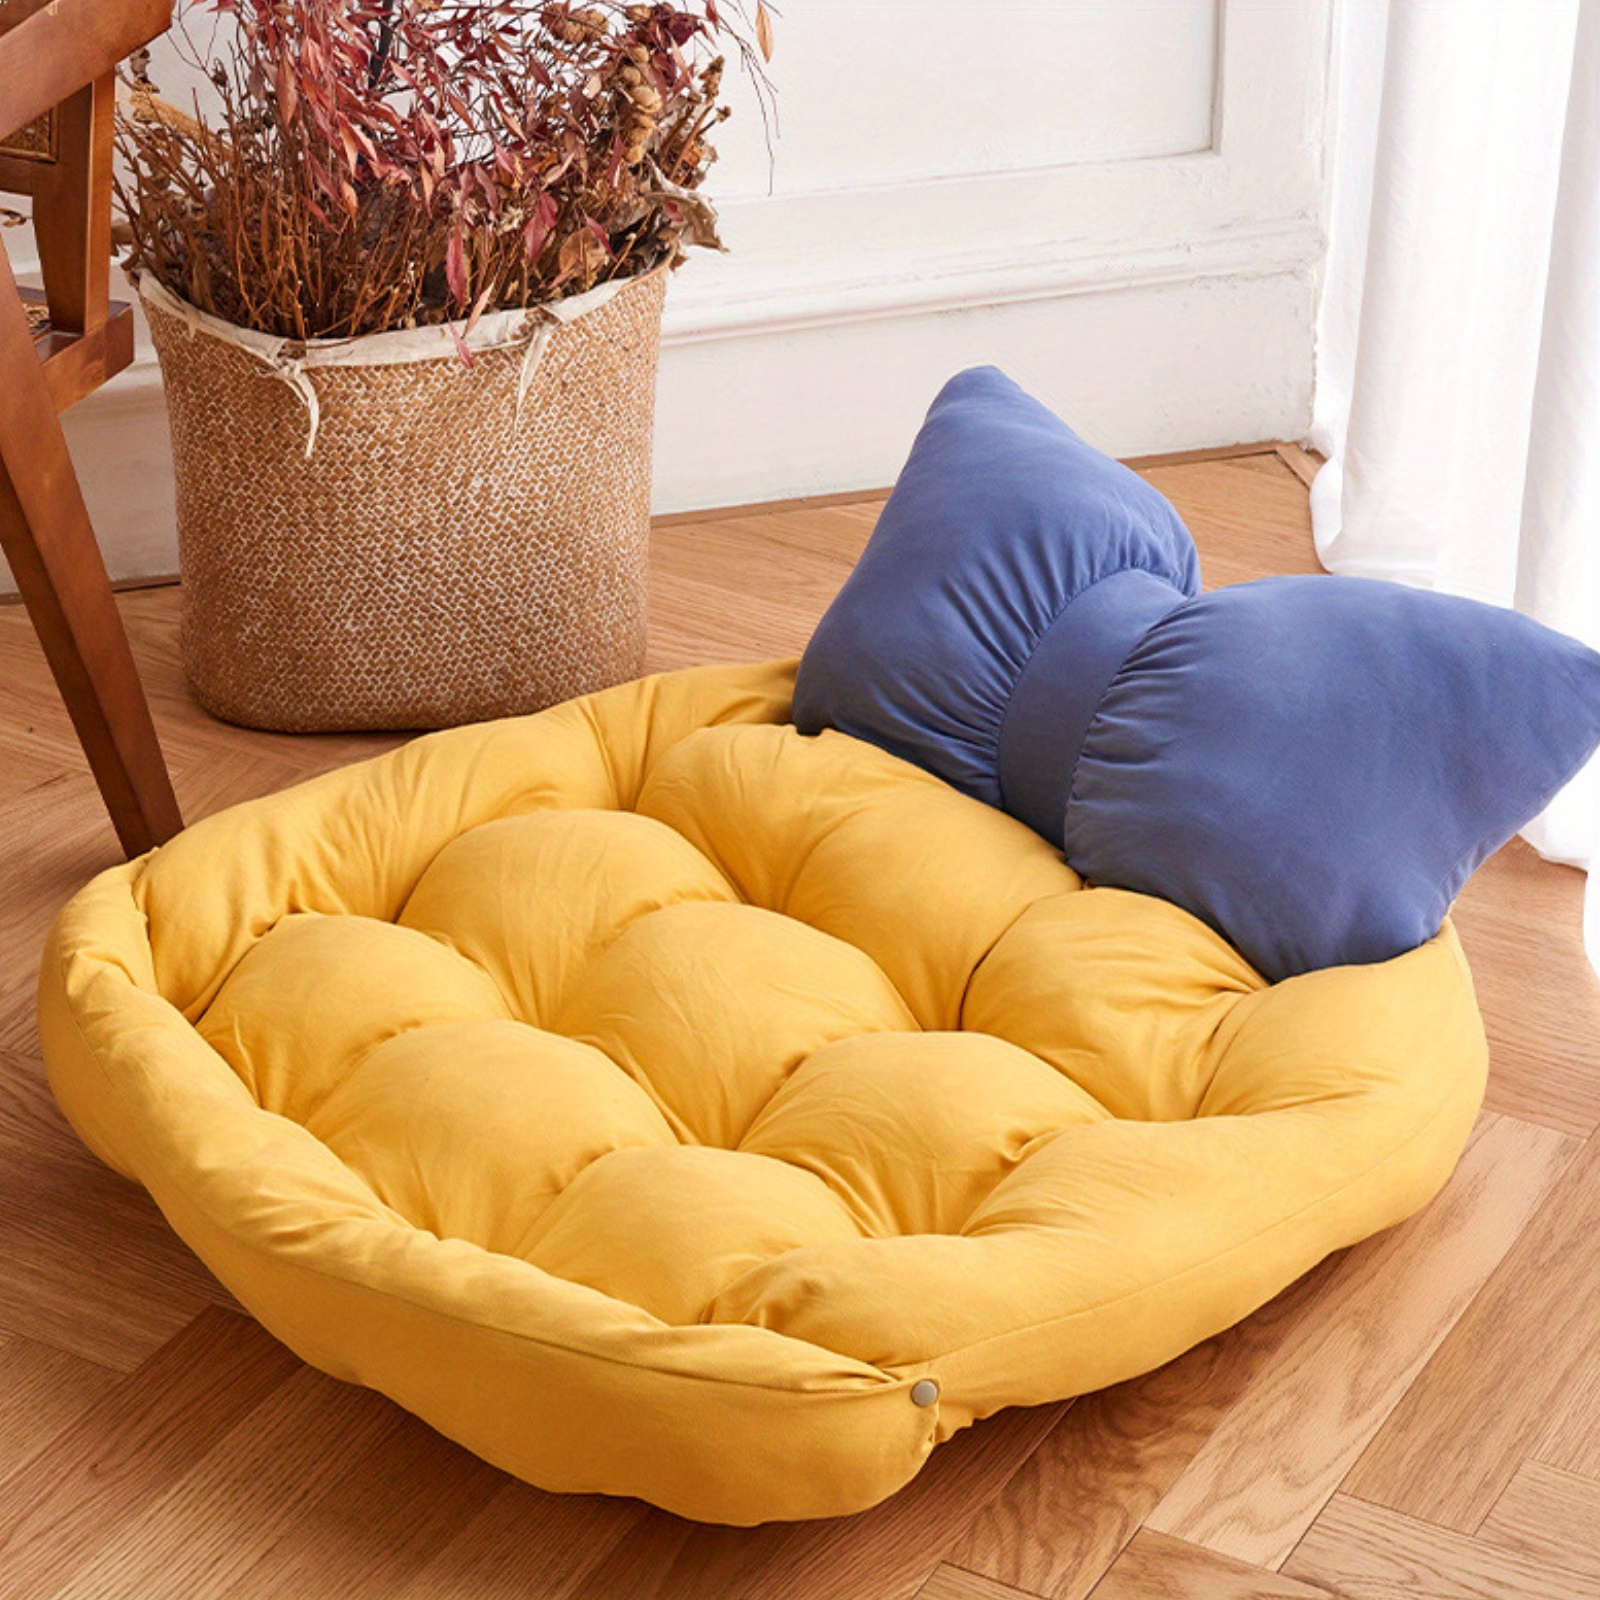 Dog Bed For Large Medium Small Dogs Cats Puppy Detachable Washable Pet Bed Pet Mat Dual Use Dog Sleeping Cushion Pad Soft Dog Beds Cushion Kennel Calming Dog Bed Cat Bed Pet Bed Bow Shape Blue Yellow Pink details 6